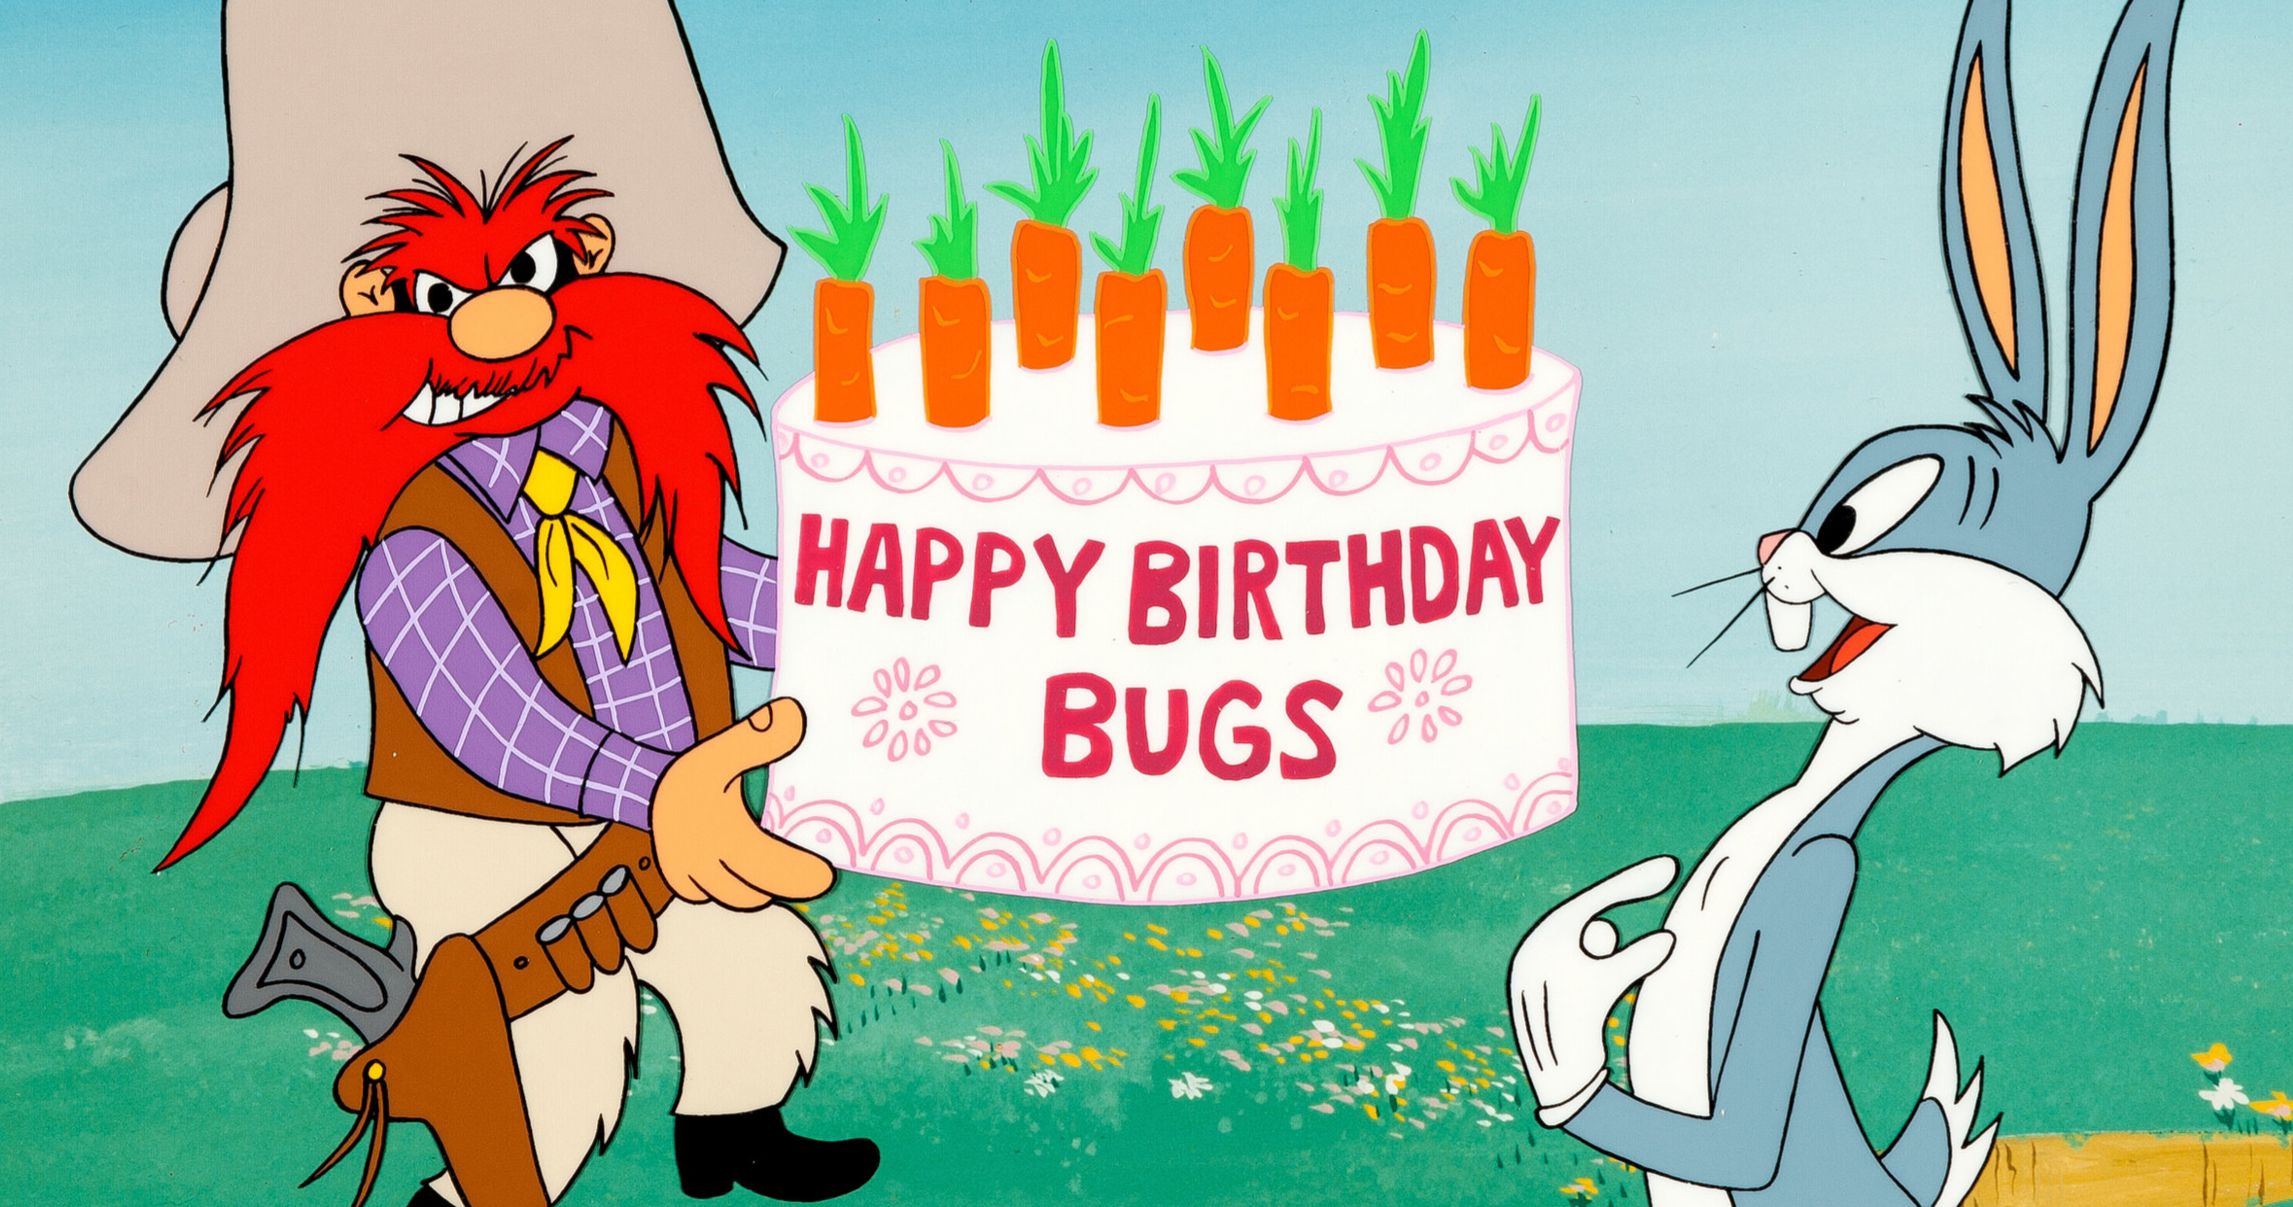 Bugs Bunny Turns 80 Today and Looney Tunes Fans Are Celebrating on Twitter